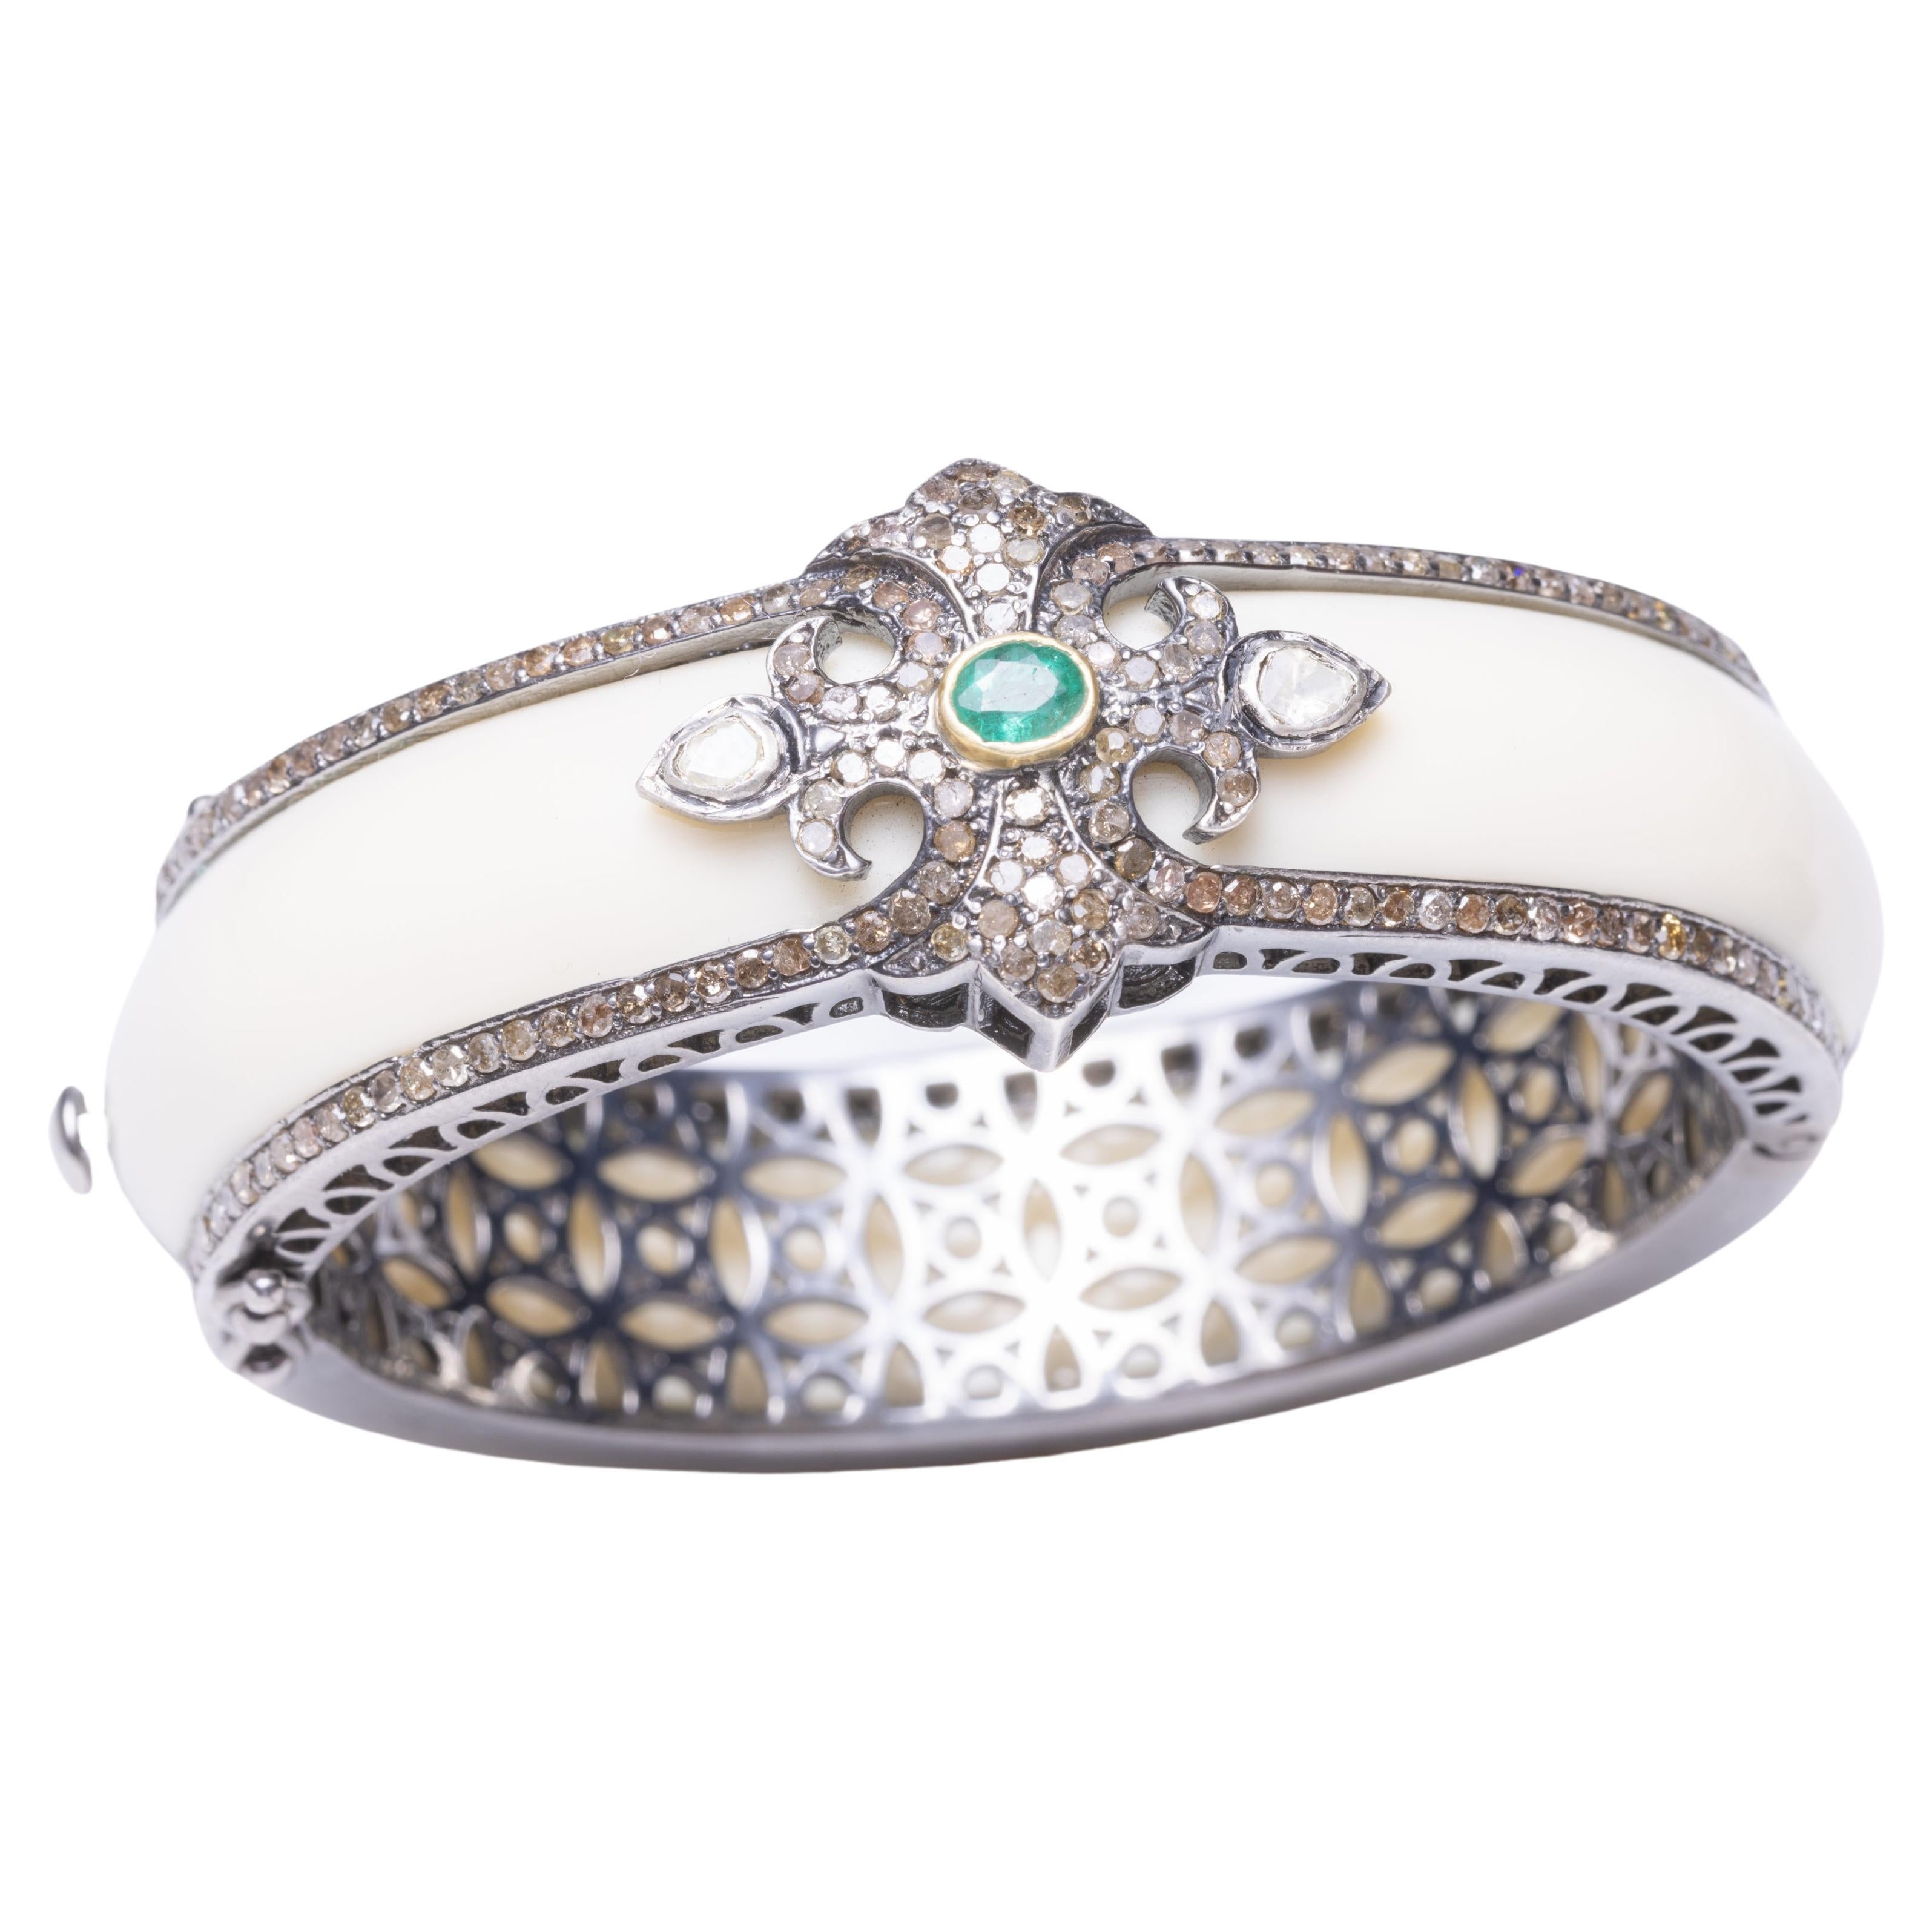 A stunning cuff bracelet in white Bakelite bordered on both sides with pave` set diamonds.  The top features additional pave` set diamonds with an oval, faceted emerald and two rose-cut diamonds on each side.  Inside circumference is 6 1/8th inch. 